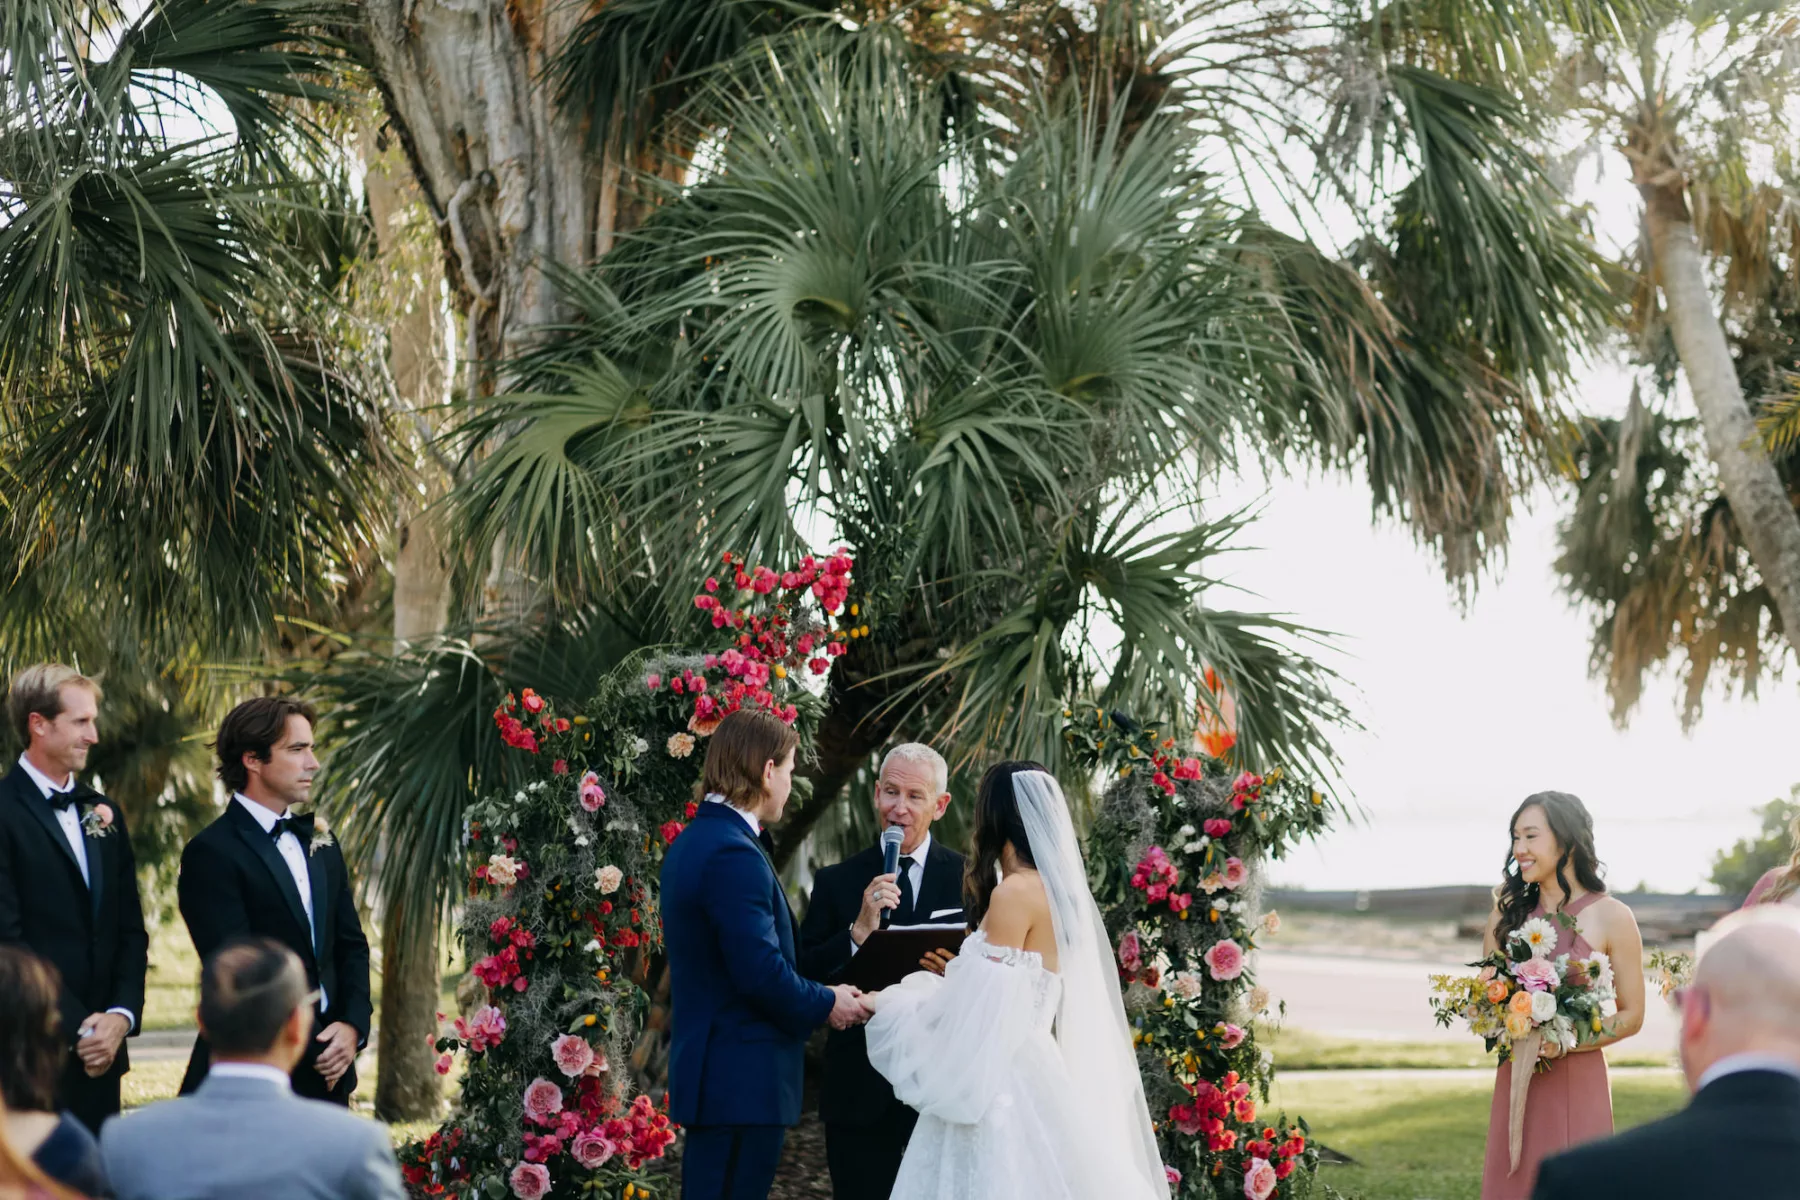 Old Florida Outdoor Fall Wedding Ceremony Inspiration | Tampa Bay Photographer Amber McWhorter Photography | Planner Coastal Coordinating